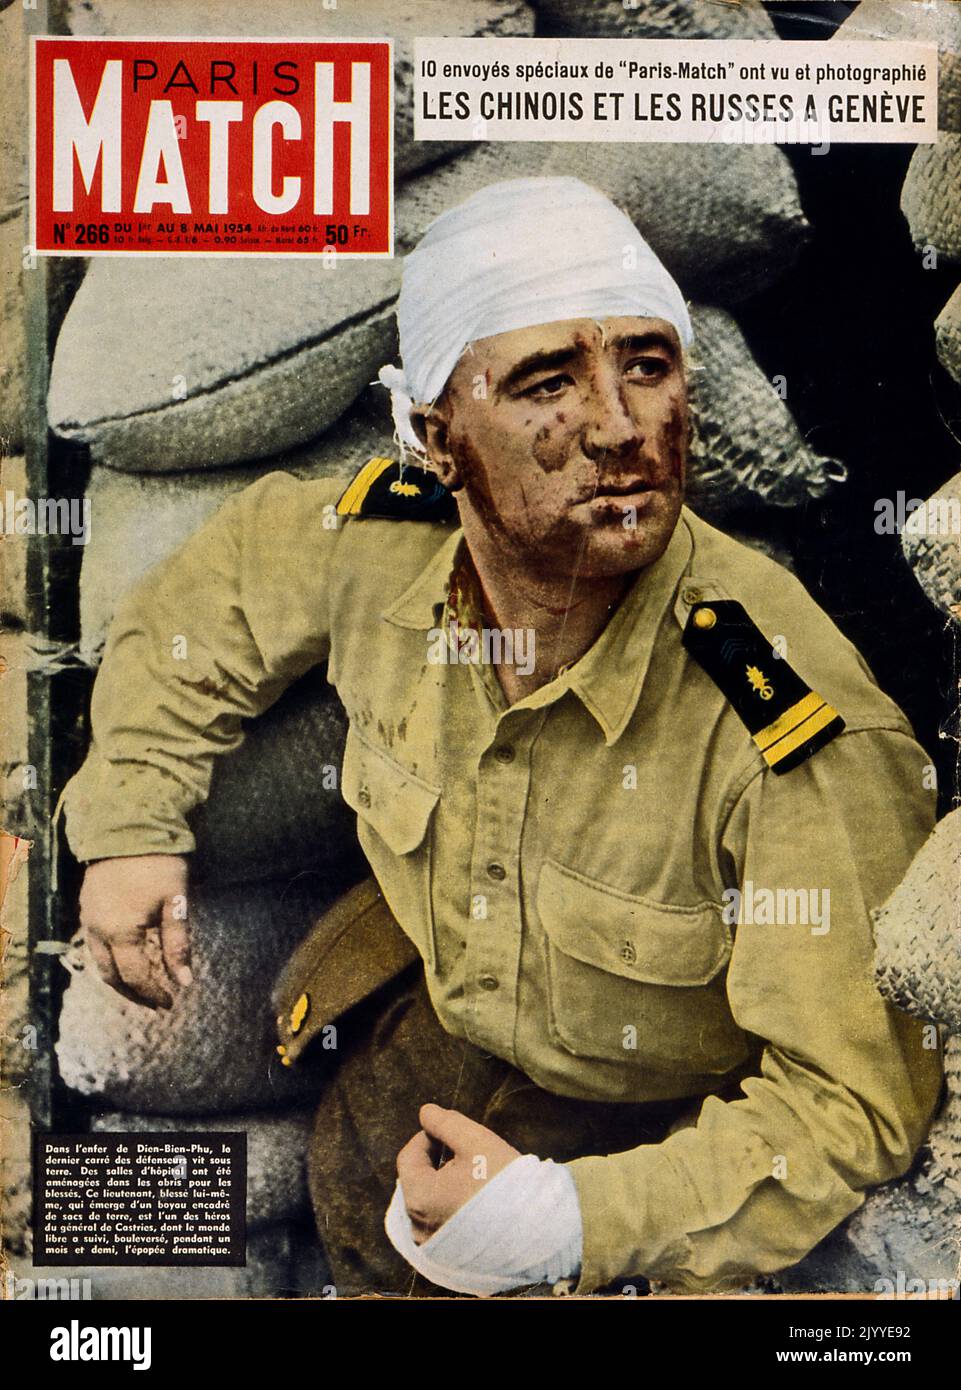 Front cover of the magazine 'Paris Match' with a colour photograph of a wounded soldier. Stock Photo